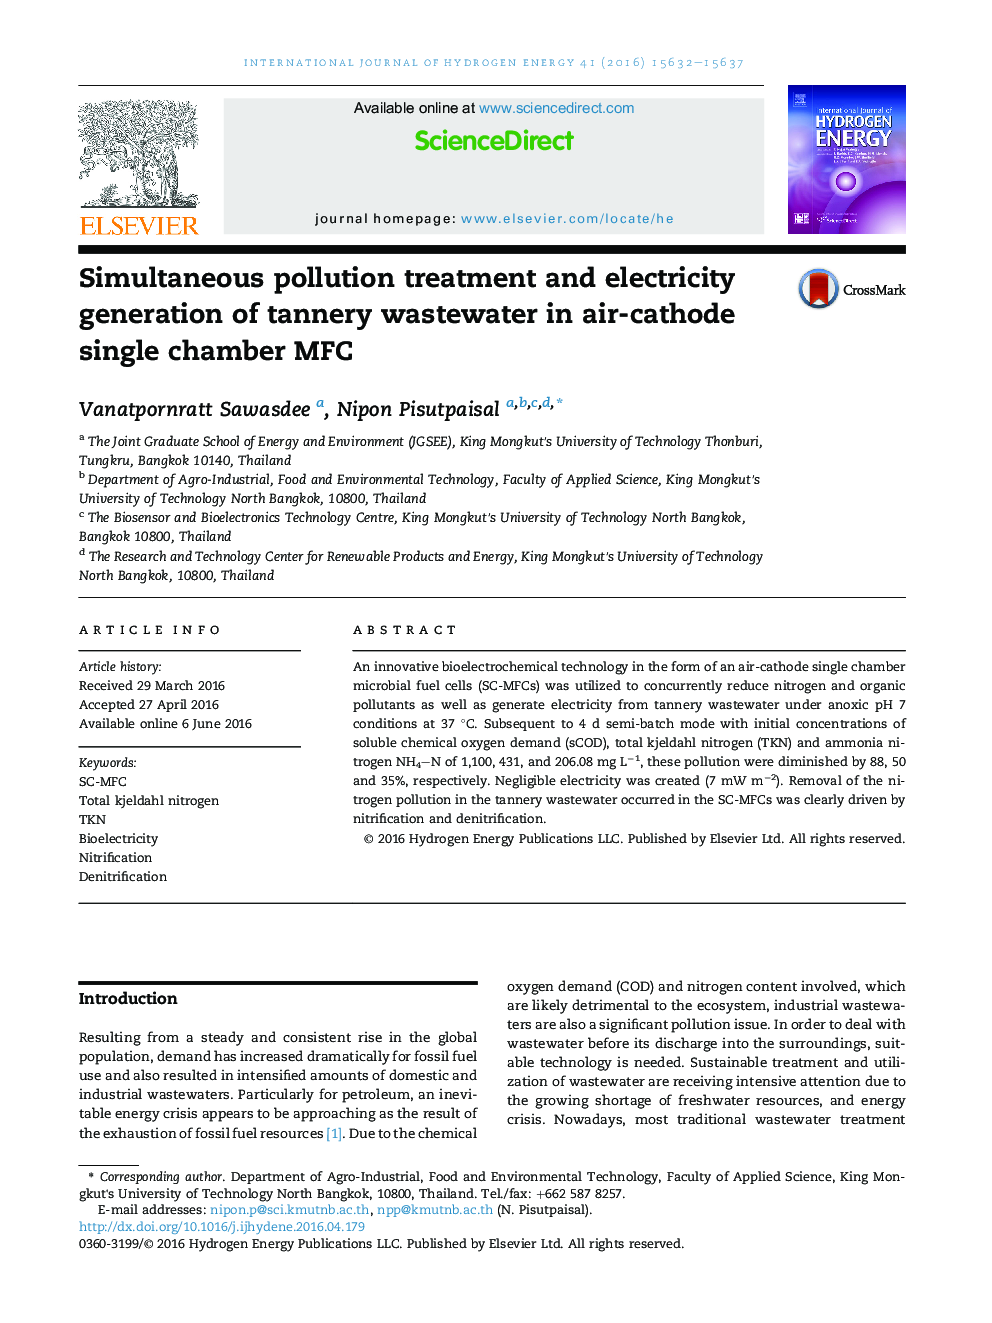 Simultaneous pollution treatment and electricity generation of tannery wastewater in air-cathode single chamber MFC